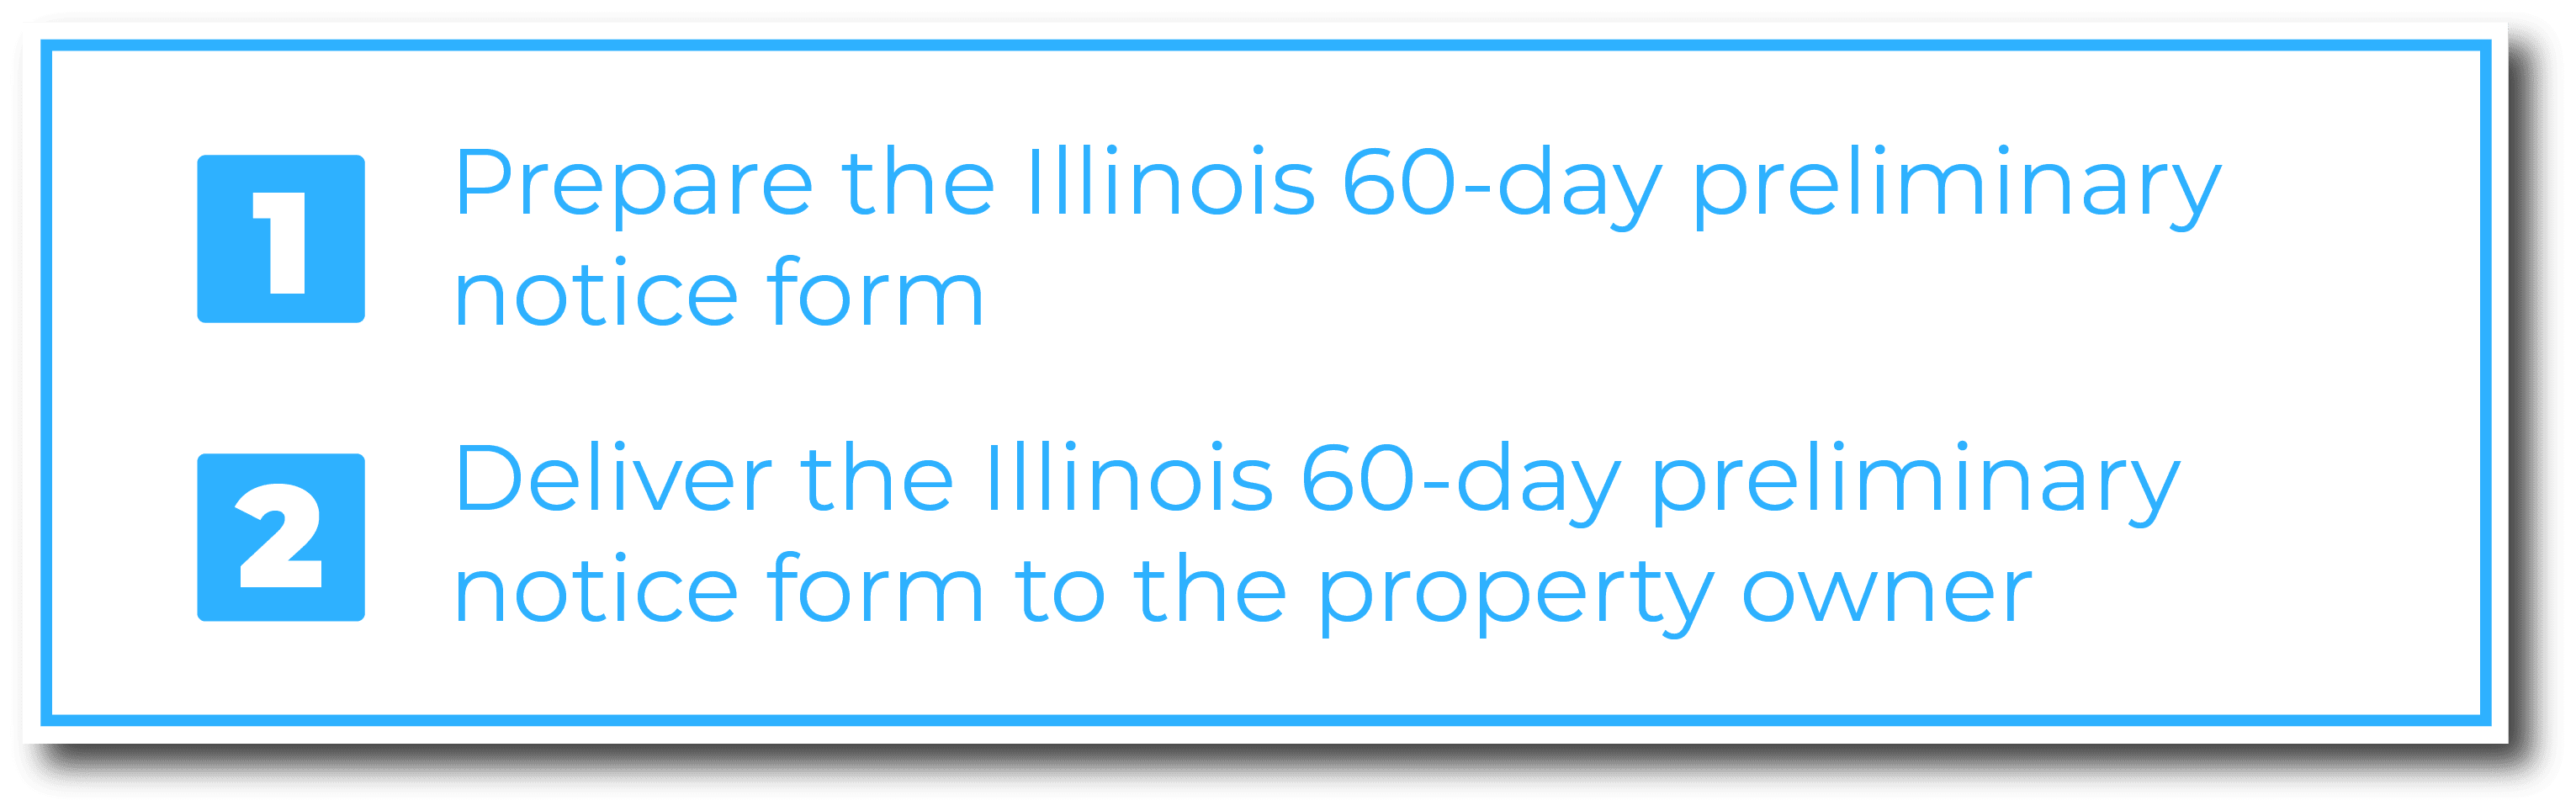 How to serve an Illinois preliminary notice